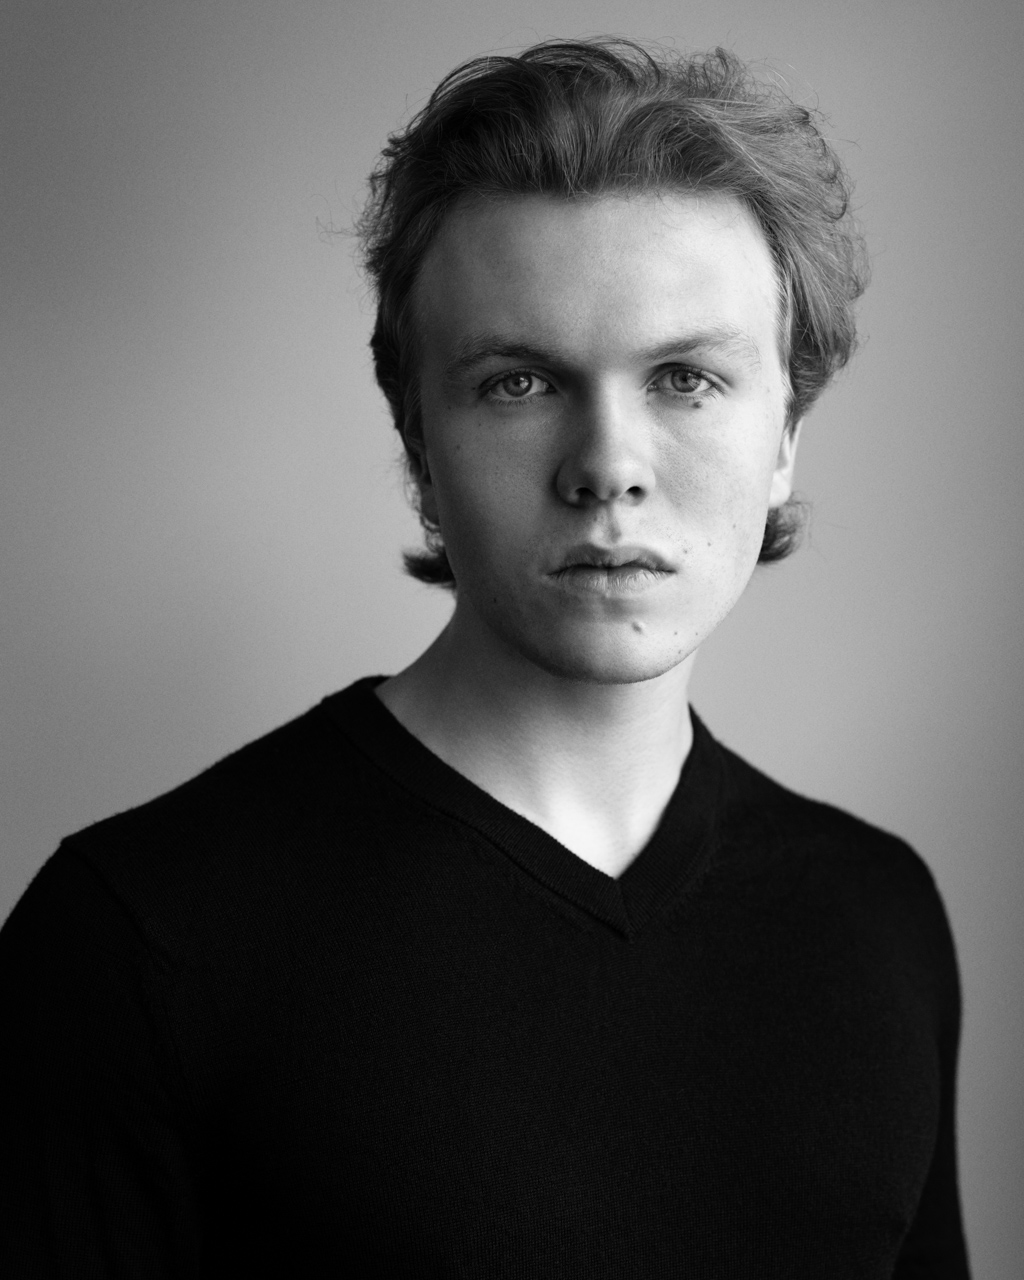 A Vancouver actor's headshot in black and white.